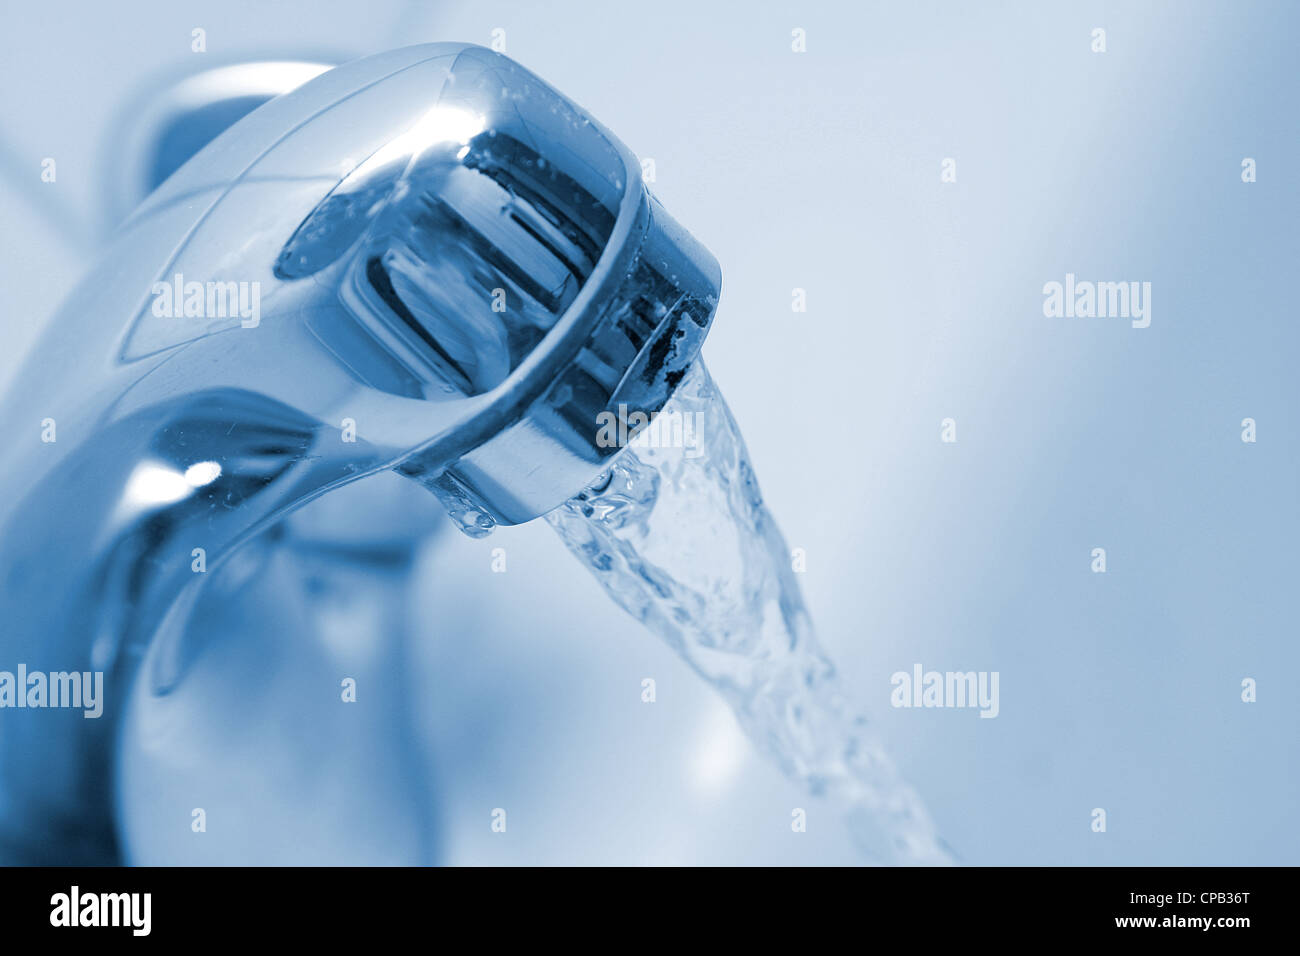 Running water from a faucet Stock Photo